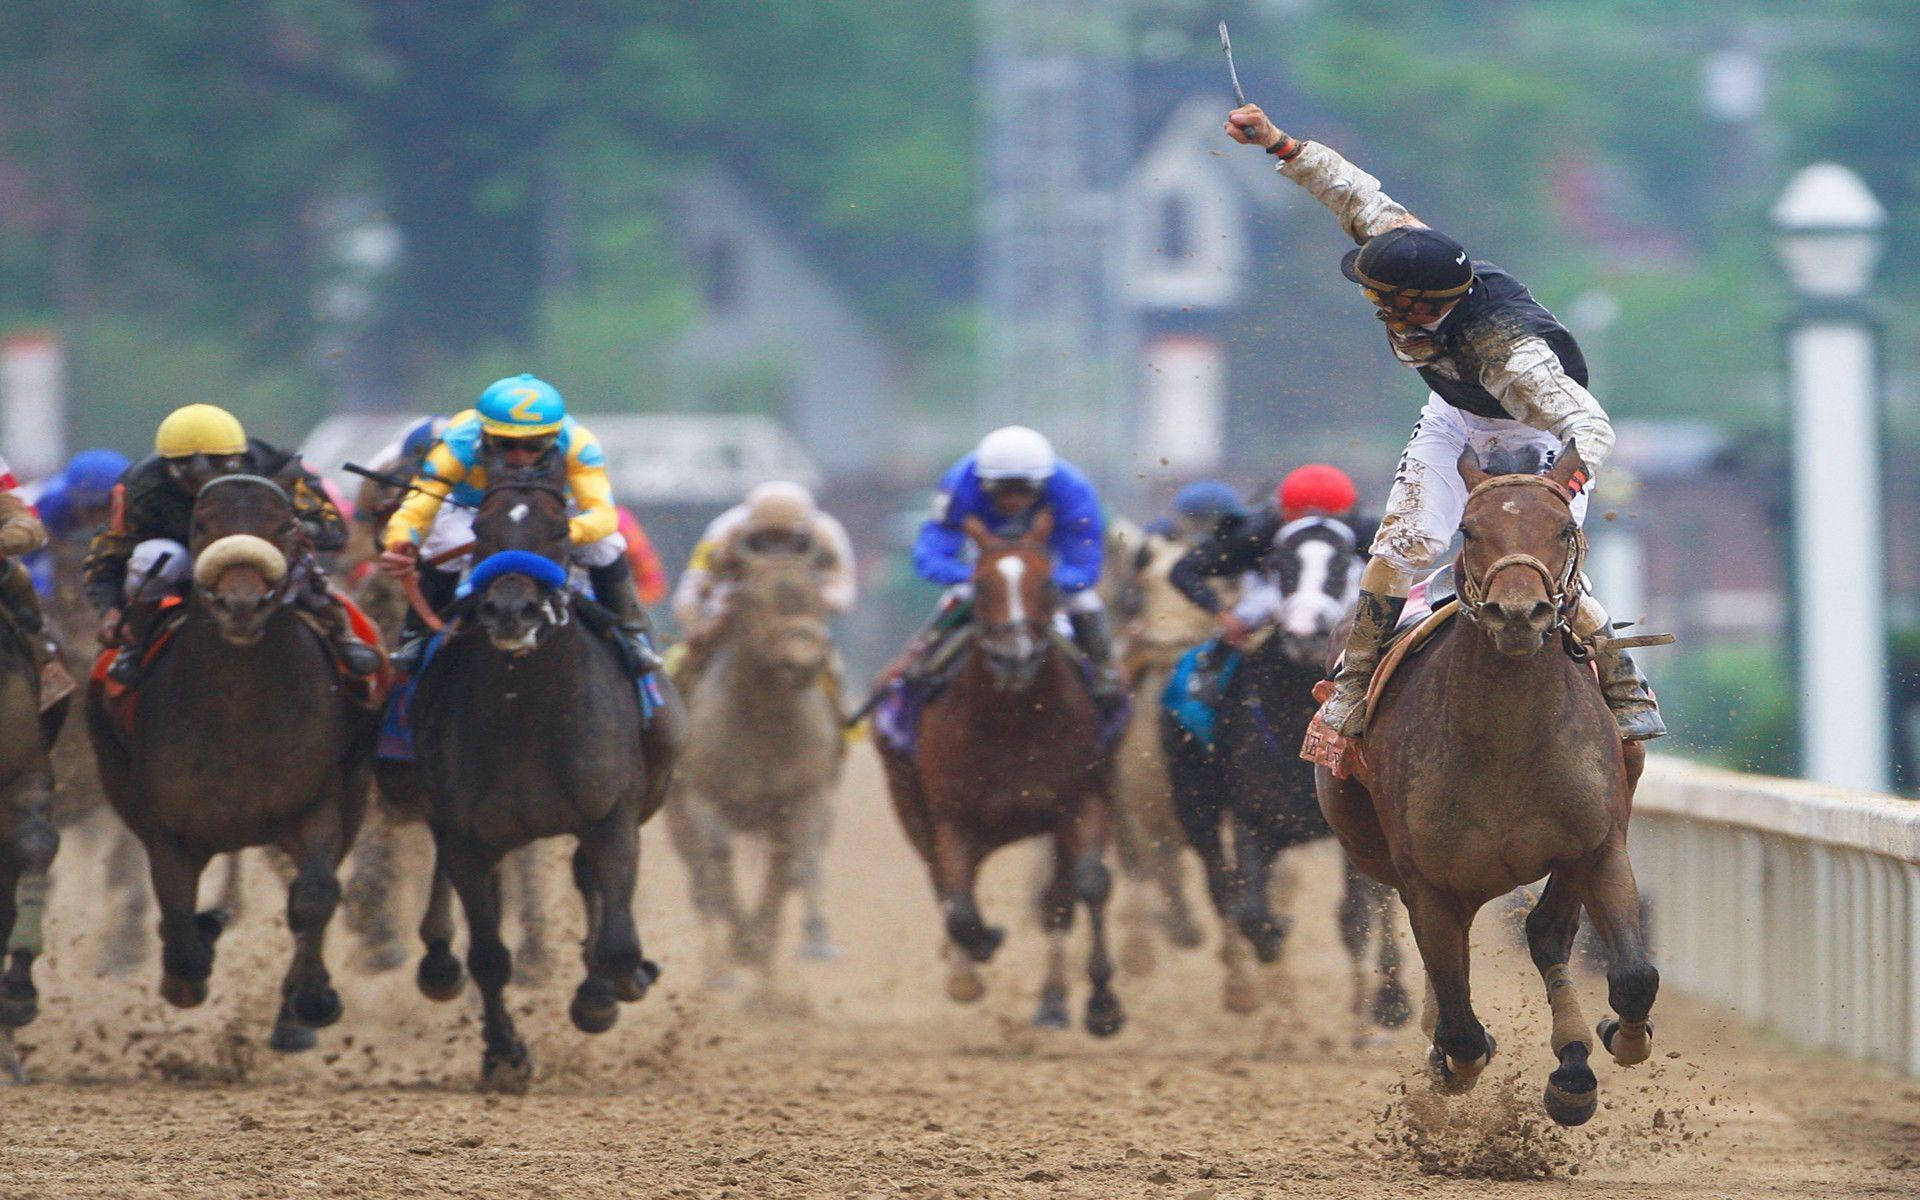 Caption: Intense Horse Racing on a Muddy Track Wallpaper